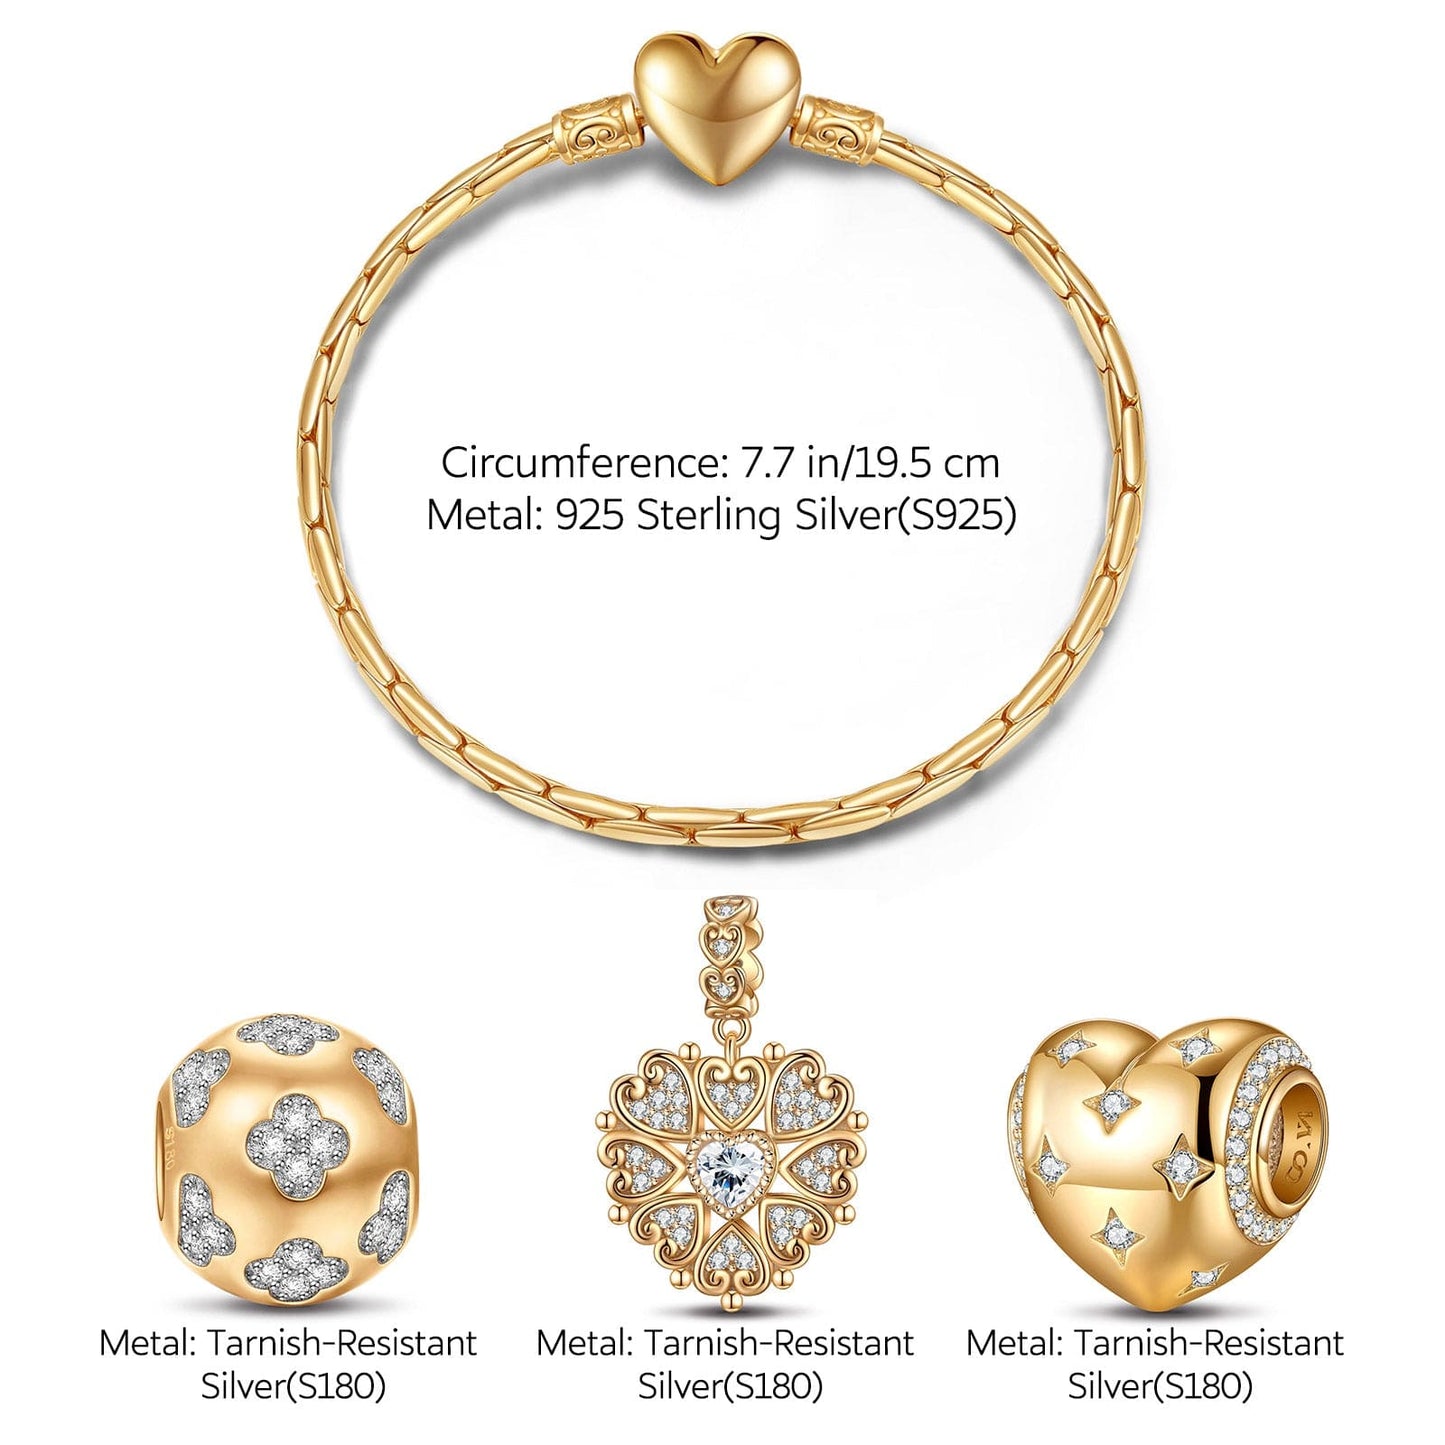 Sterling Silver Love At First Sight Charms Bracelet Set In 14K Gold Plated